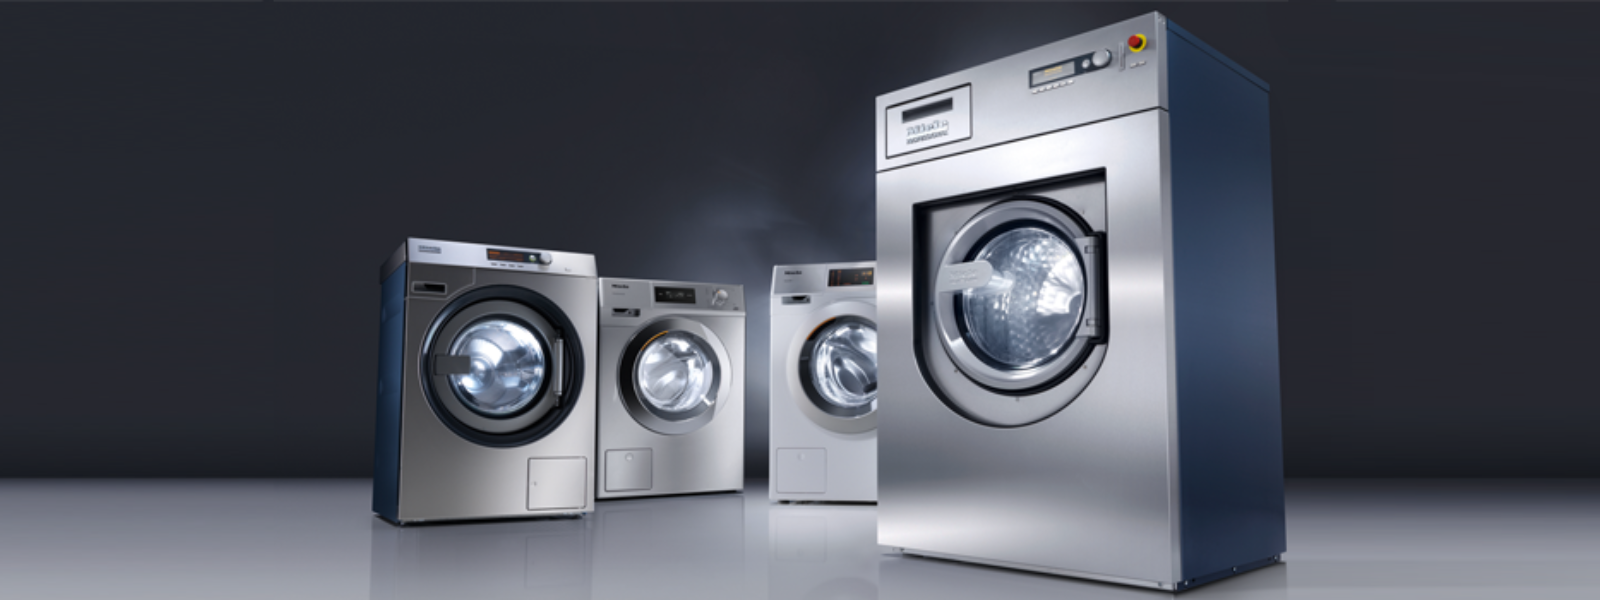 DESTEIN OÜ - Miele laundry equipment - washing machines, dryers, ironing calenders. Leaders in innovation, representing o...